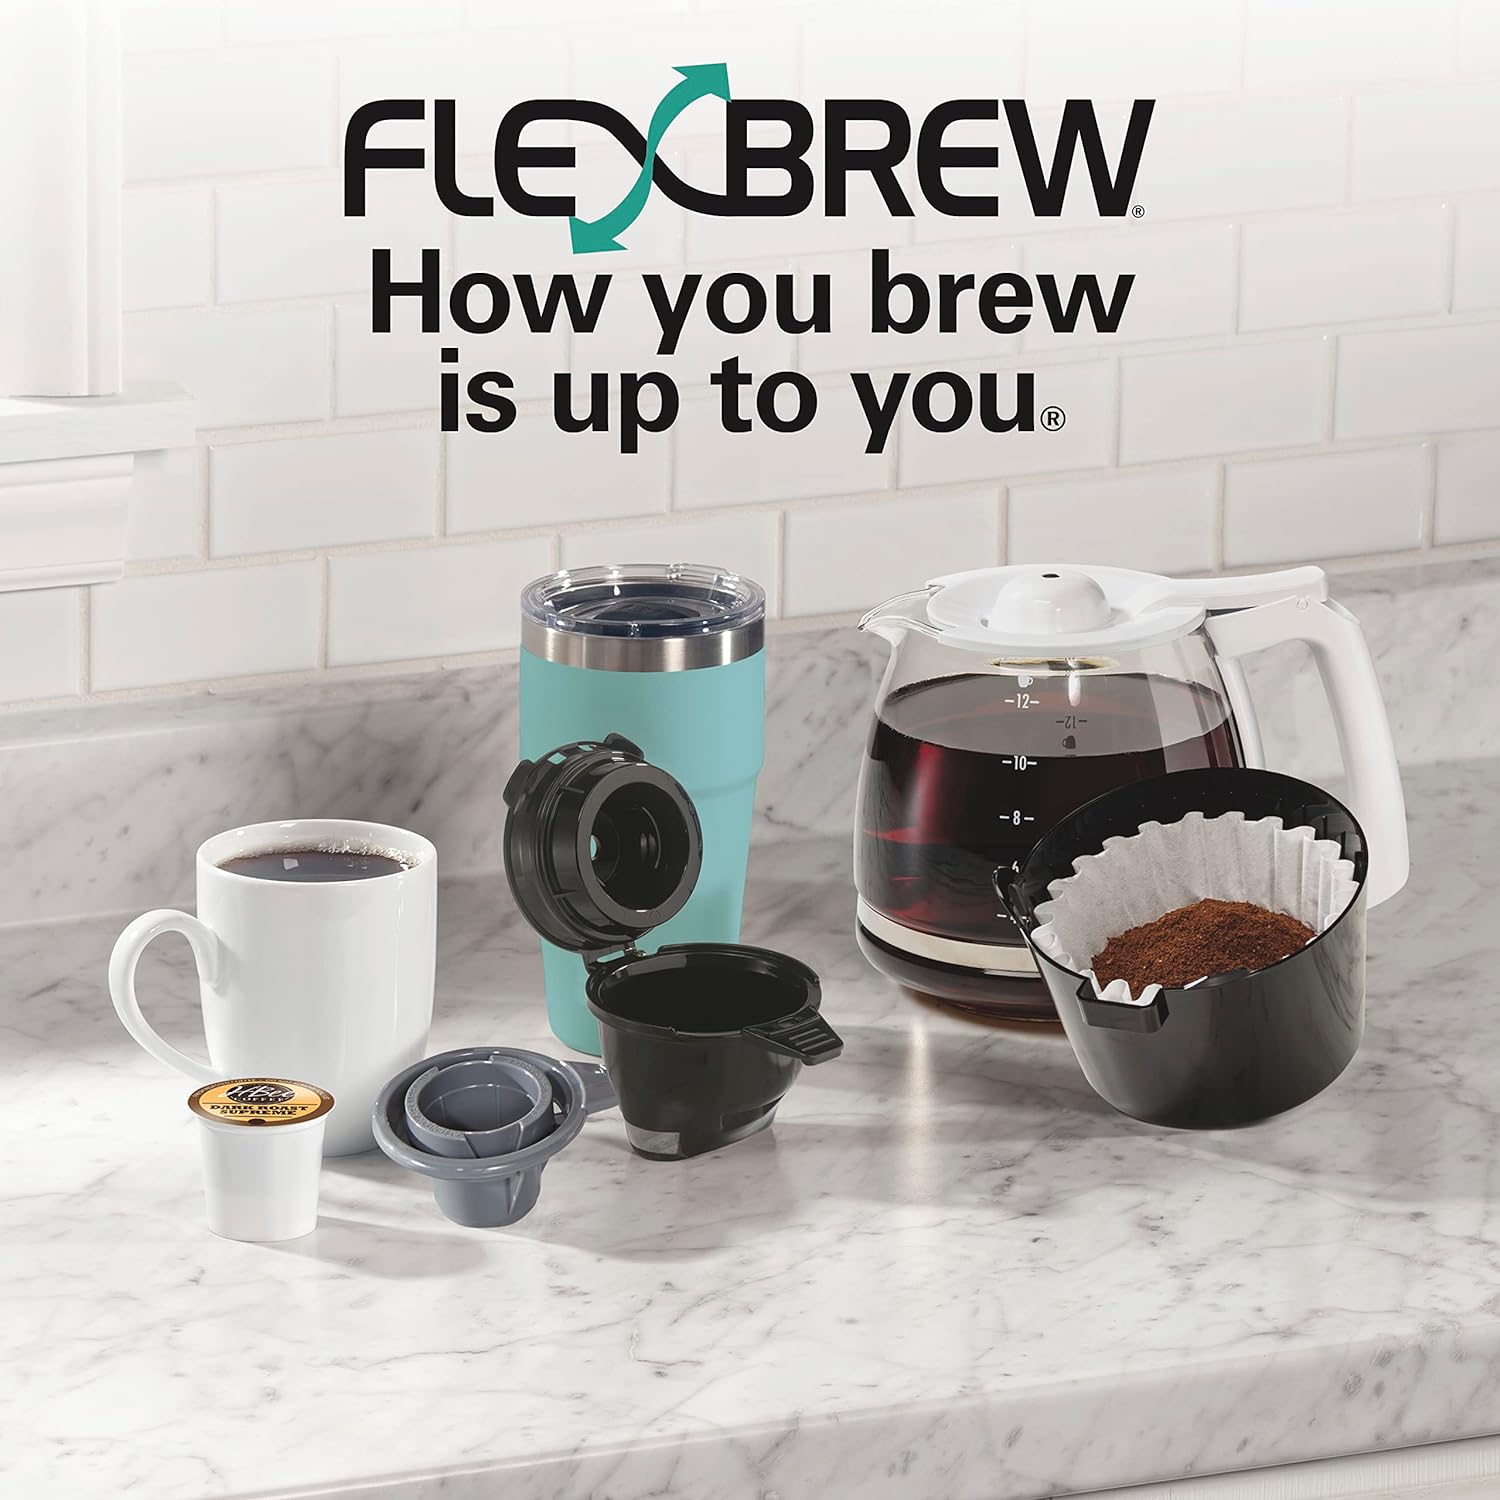 Hamilton Beach 49902 FlexBrew Trio 2-Way Coffee Maker, Compatible with K-Cup Pods or Grounds, Combo, Single Serve  Full 12c Pot, Black - Fast Brewing